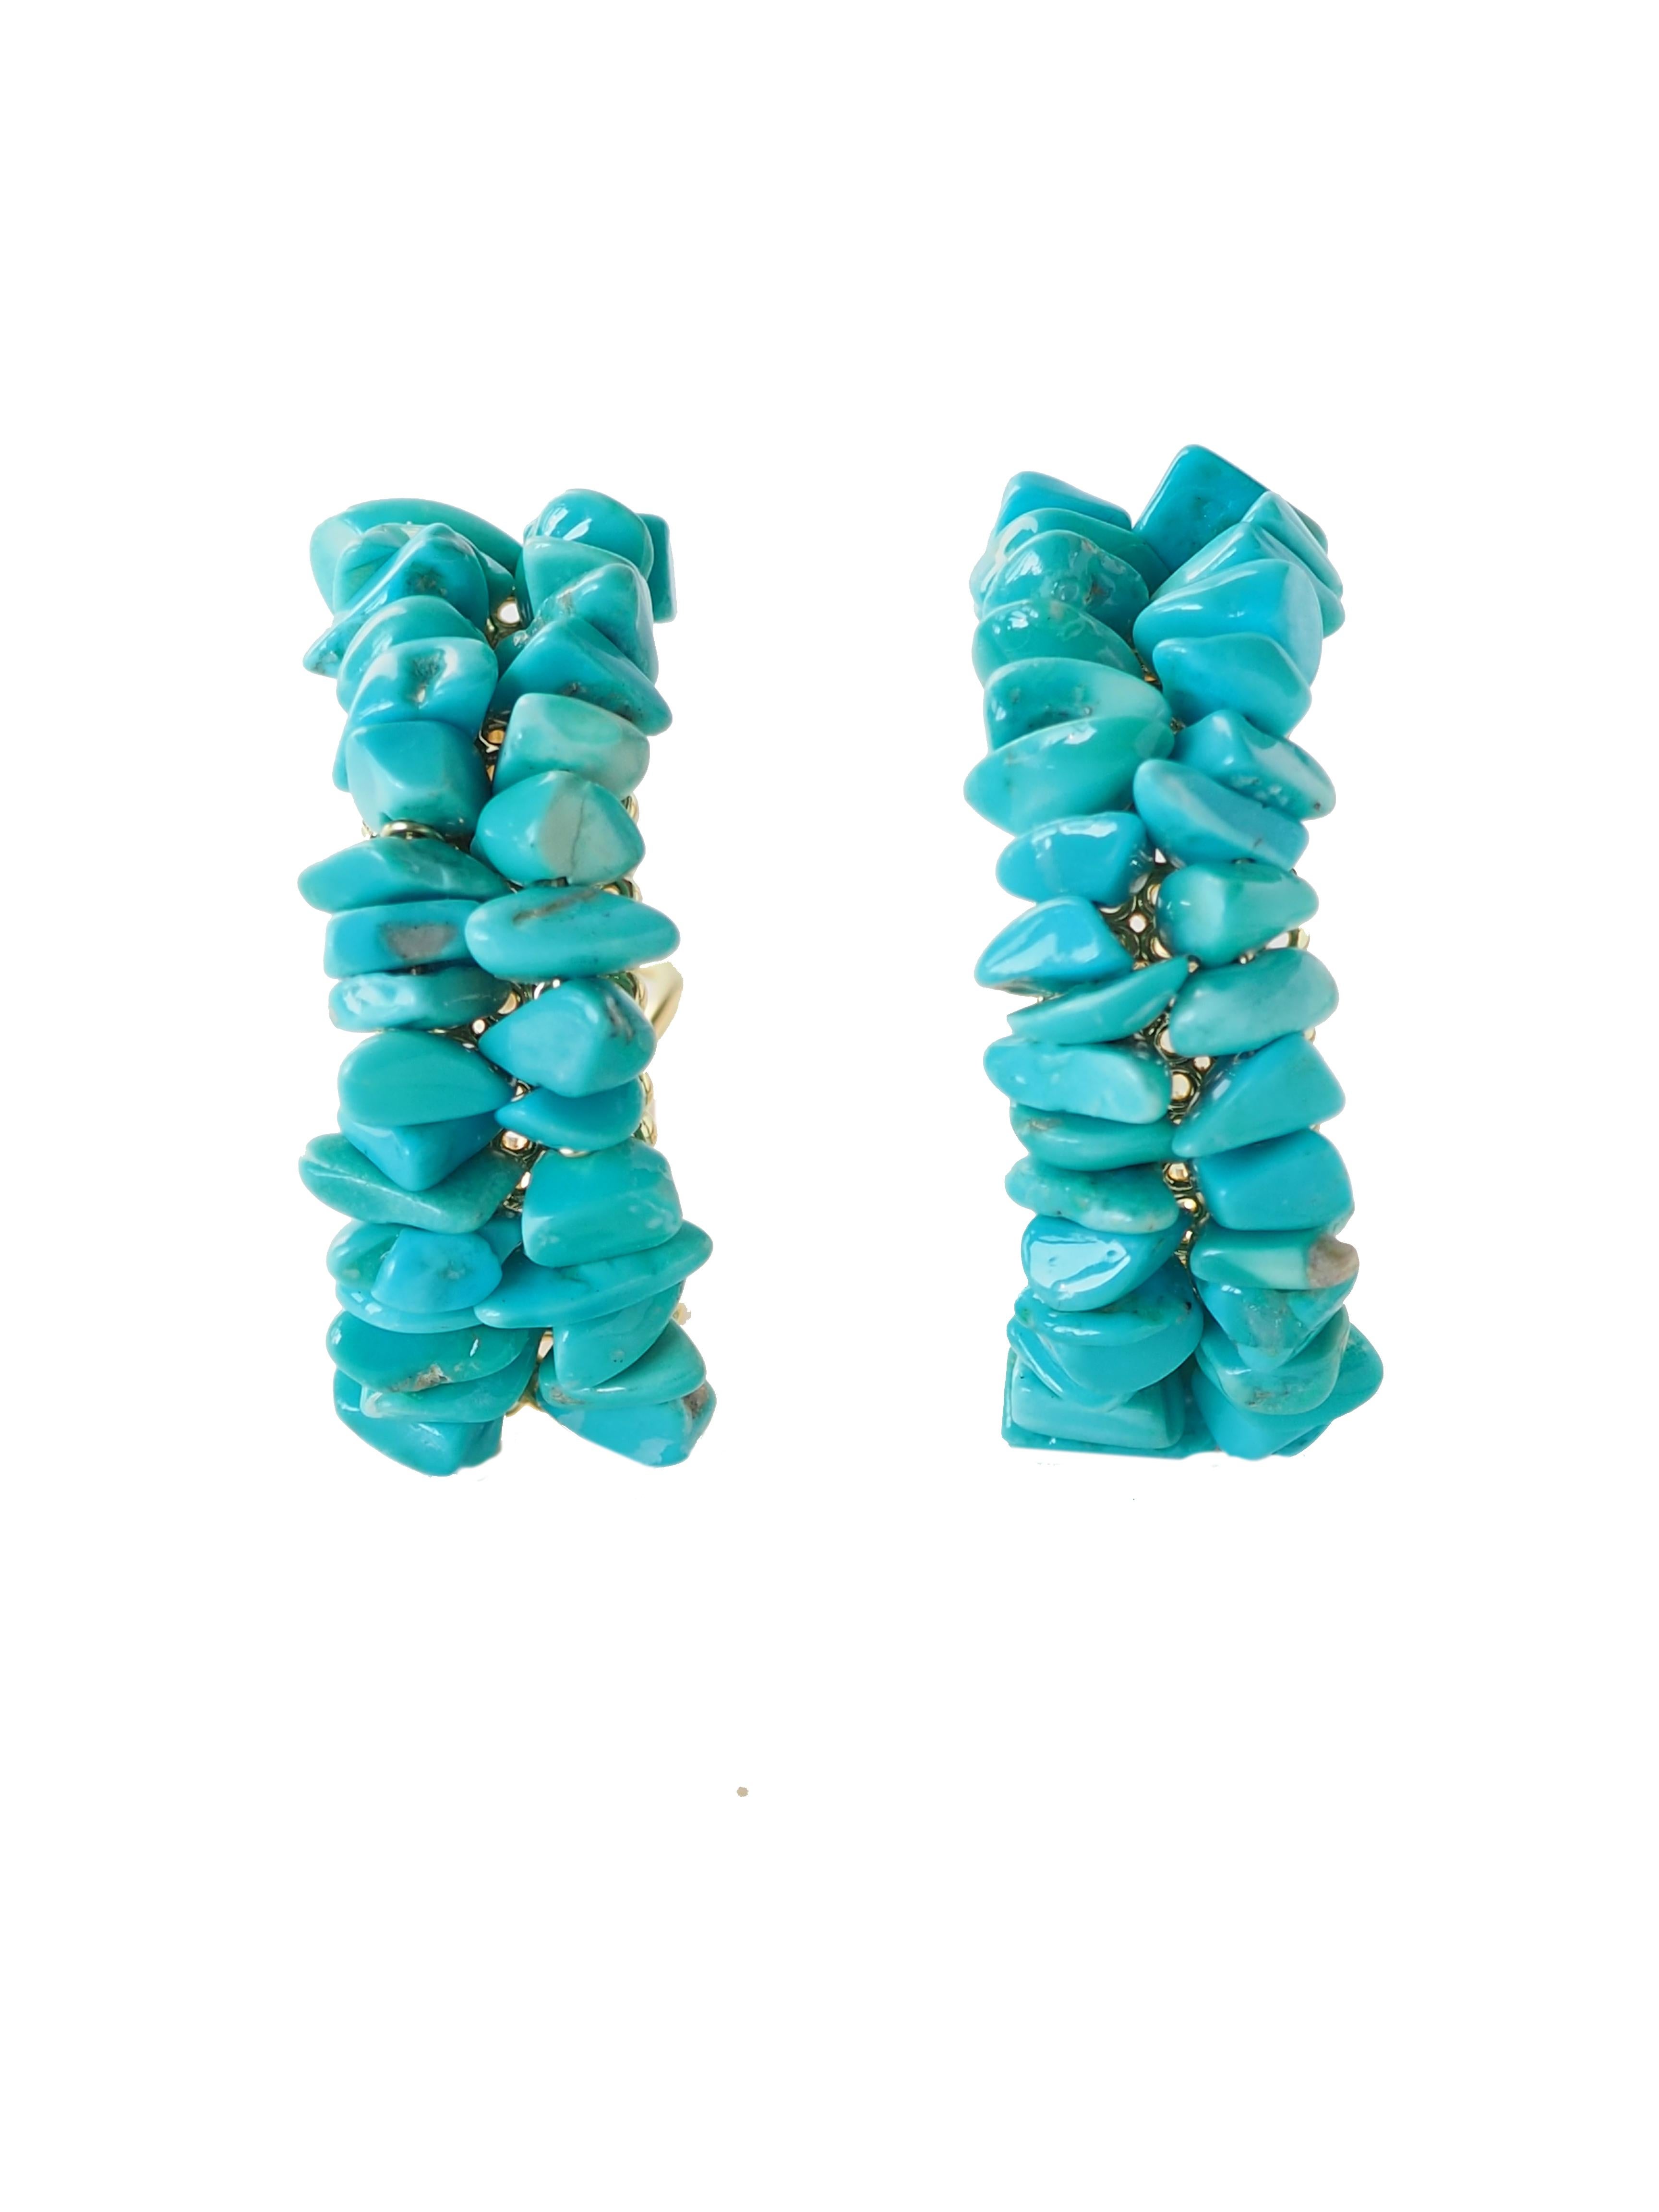 Sky Arch earrings with Turquoise natural stone 18k gold 15,96gr. length 4cm weight 14,1 gr each, 4 cm big large 0,5 cm.
All Giulia Colussi jewelry is new and has never been previously owned or worn. Each item will arrive at your door beautifully